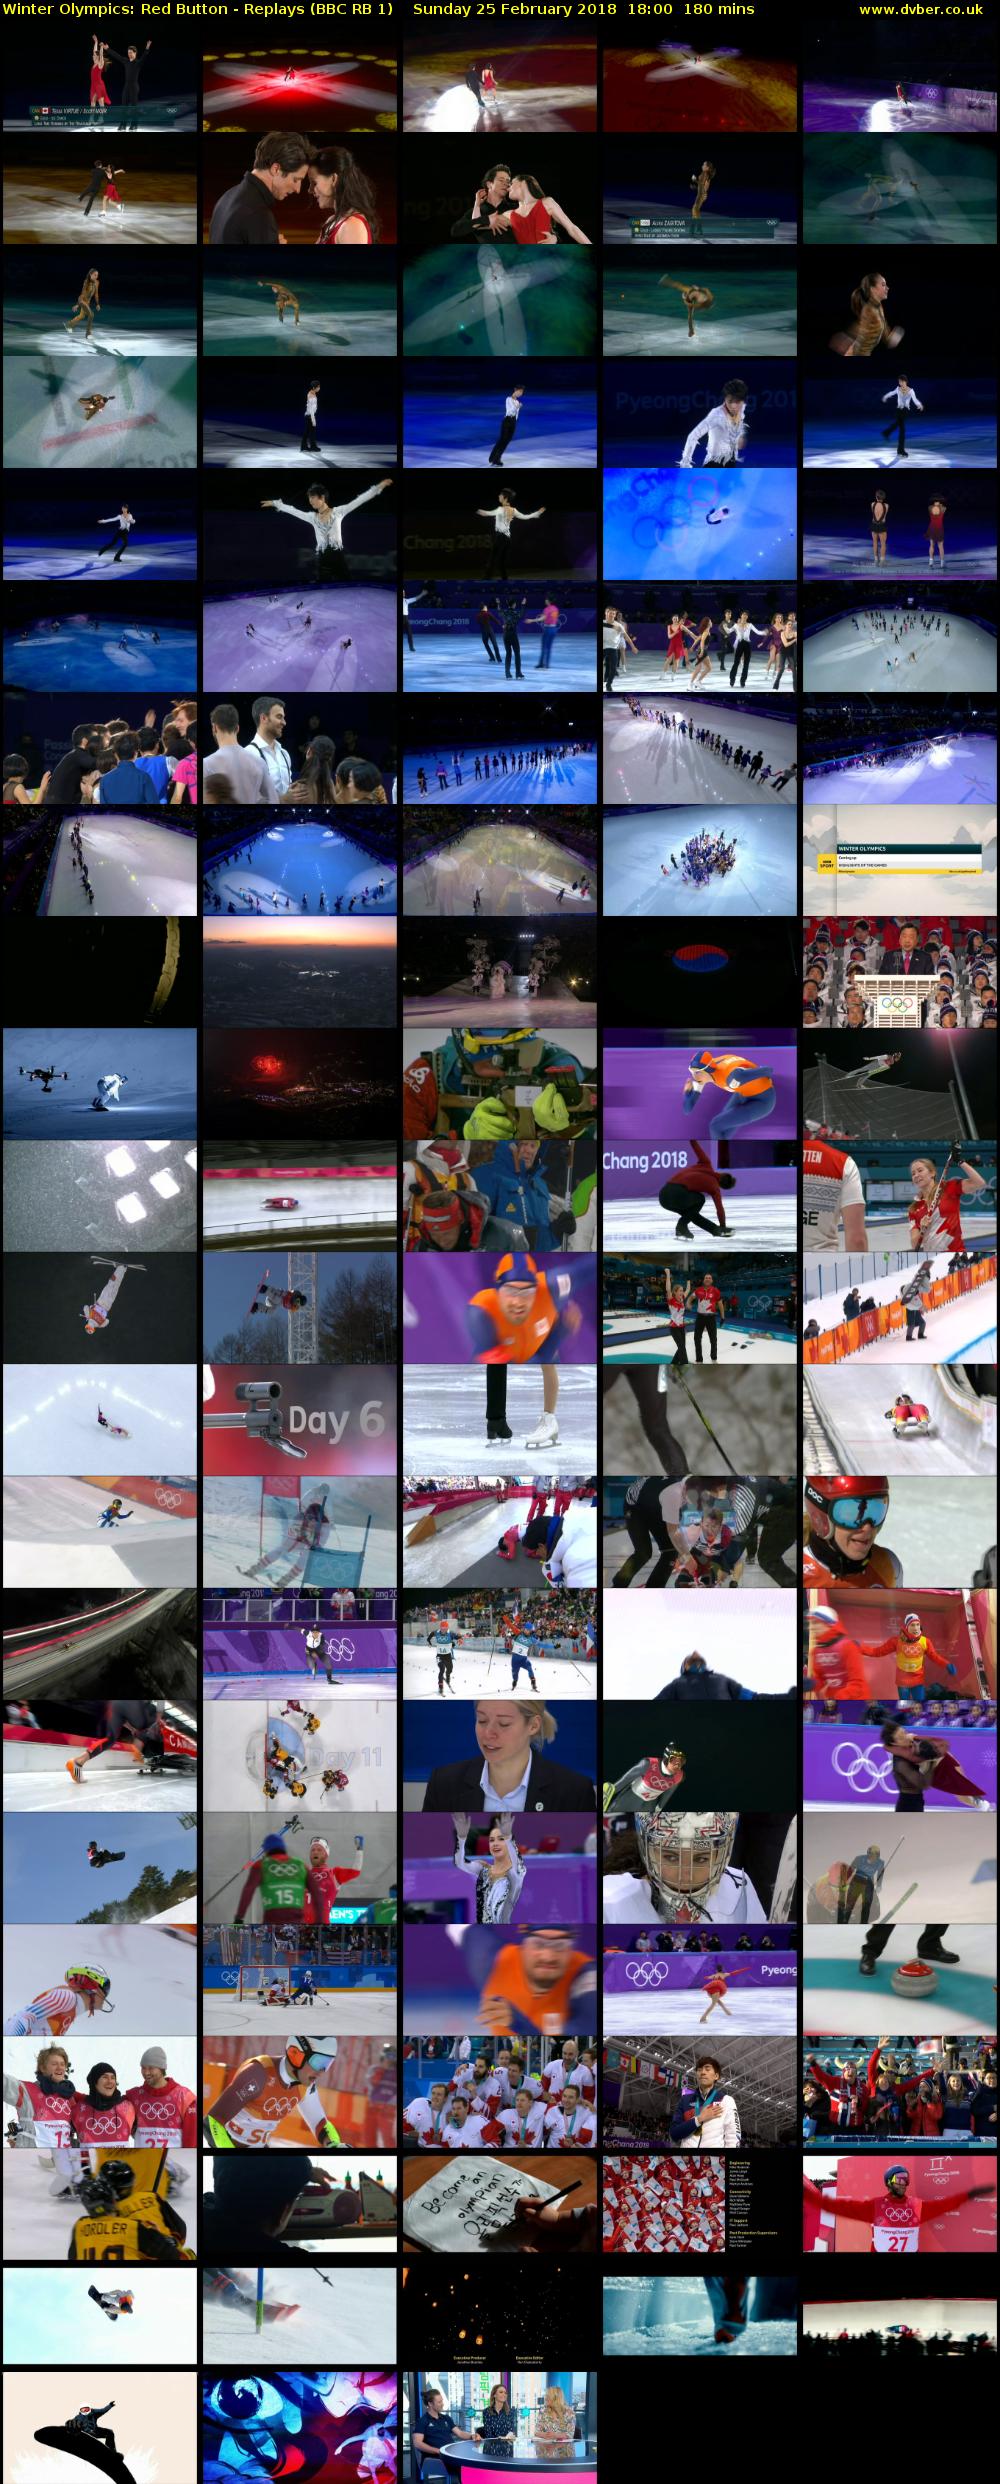 Winter Olympics: Red Button - Replays (BBC RB 1) Sunday 25 February 2018 18:00 - 21:00